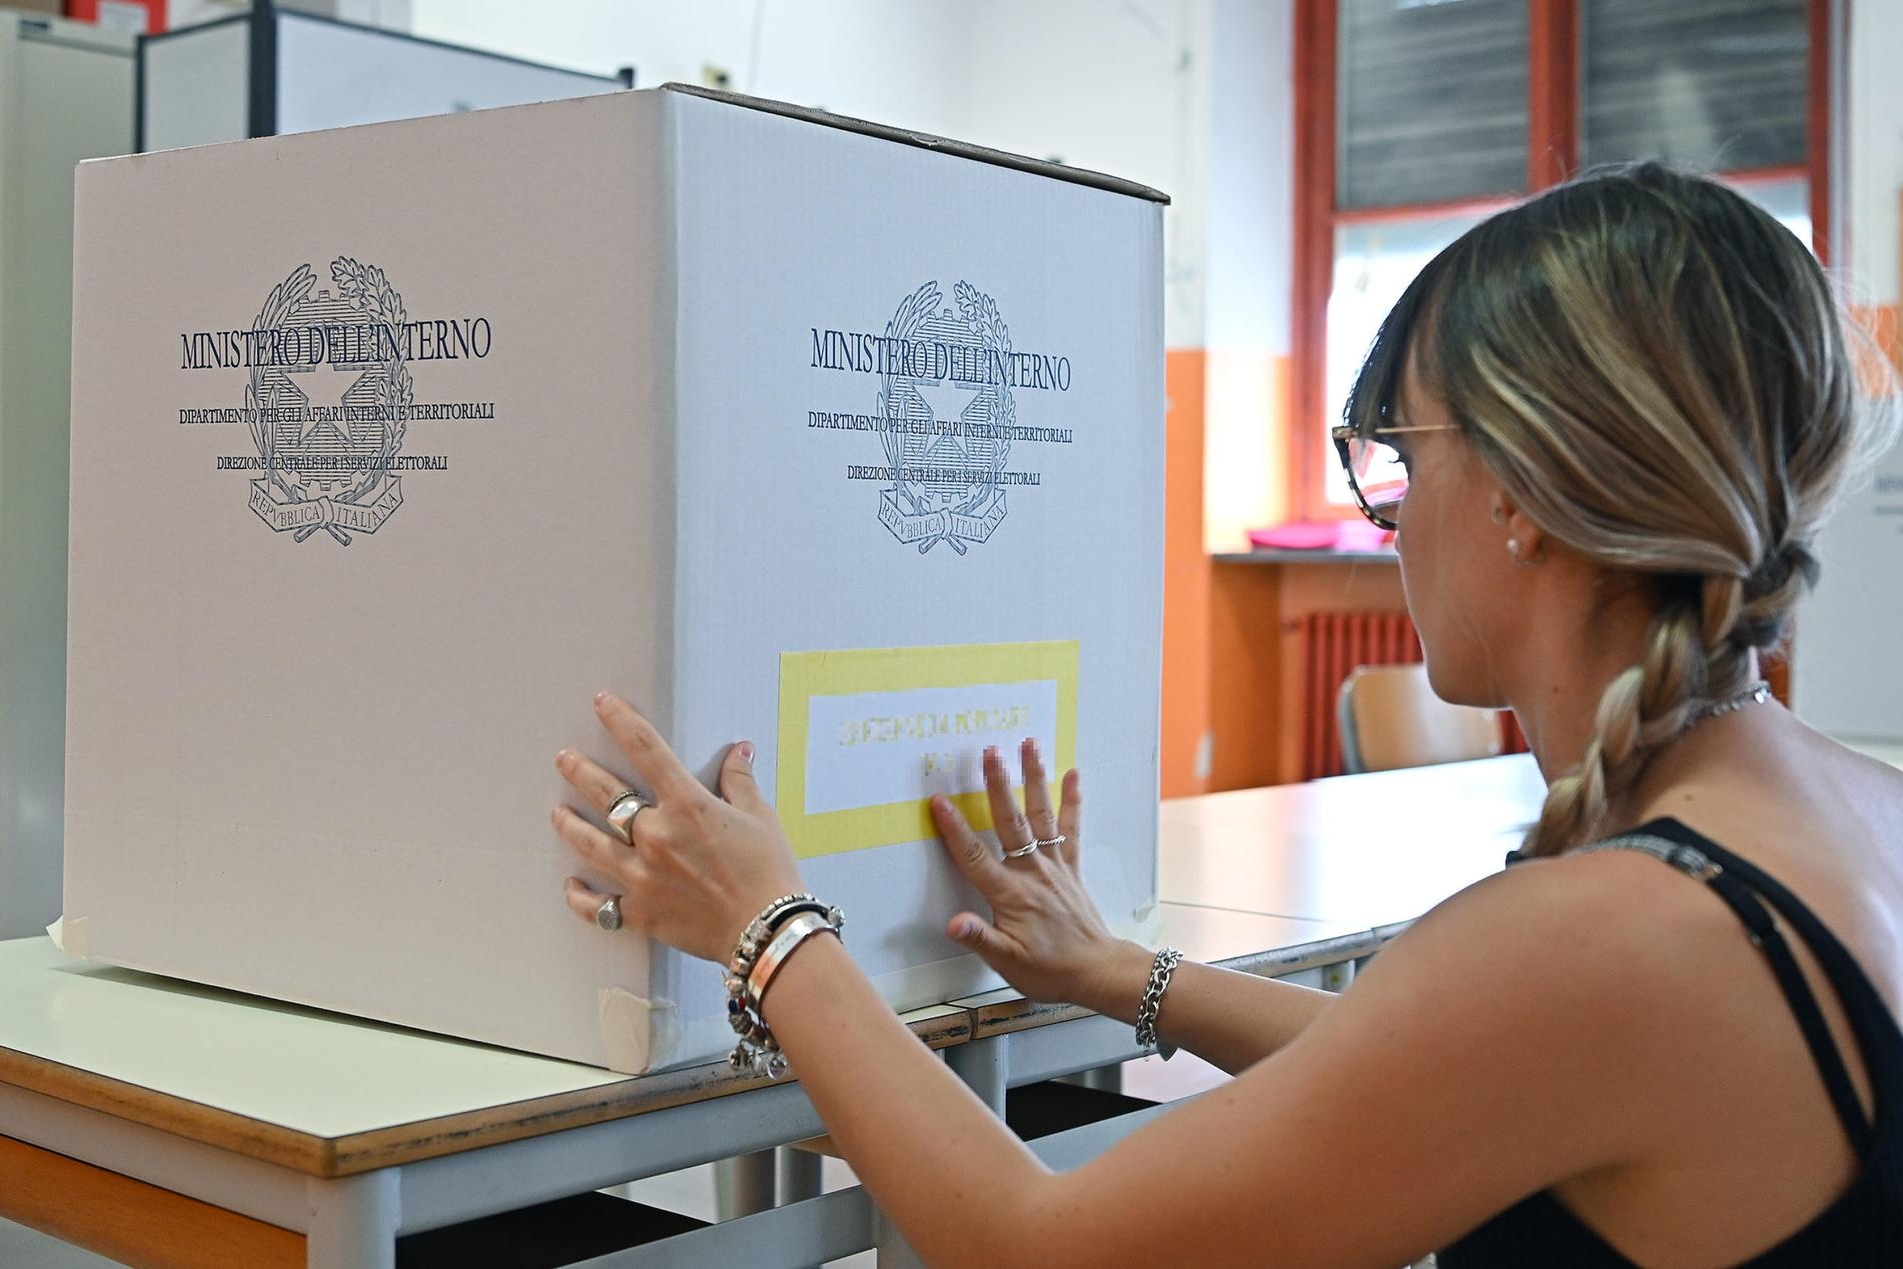 Preparation of a polling station on to vote, tomorrow 12 June, on five referenda regarding justice issues, in Turin, Italy, 11 June 2022. ANSA/ALESSANDRO DI MARCO